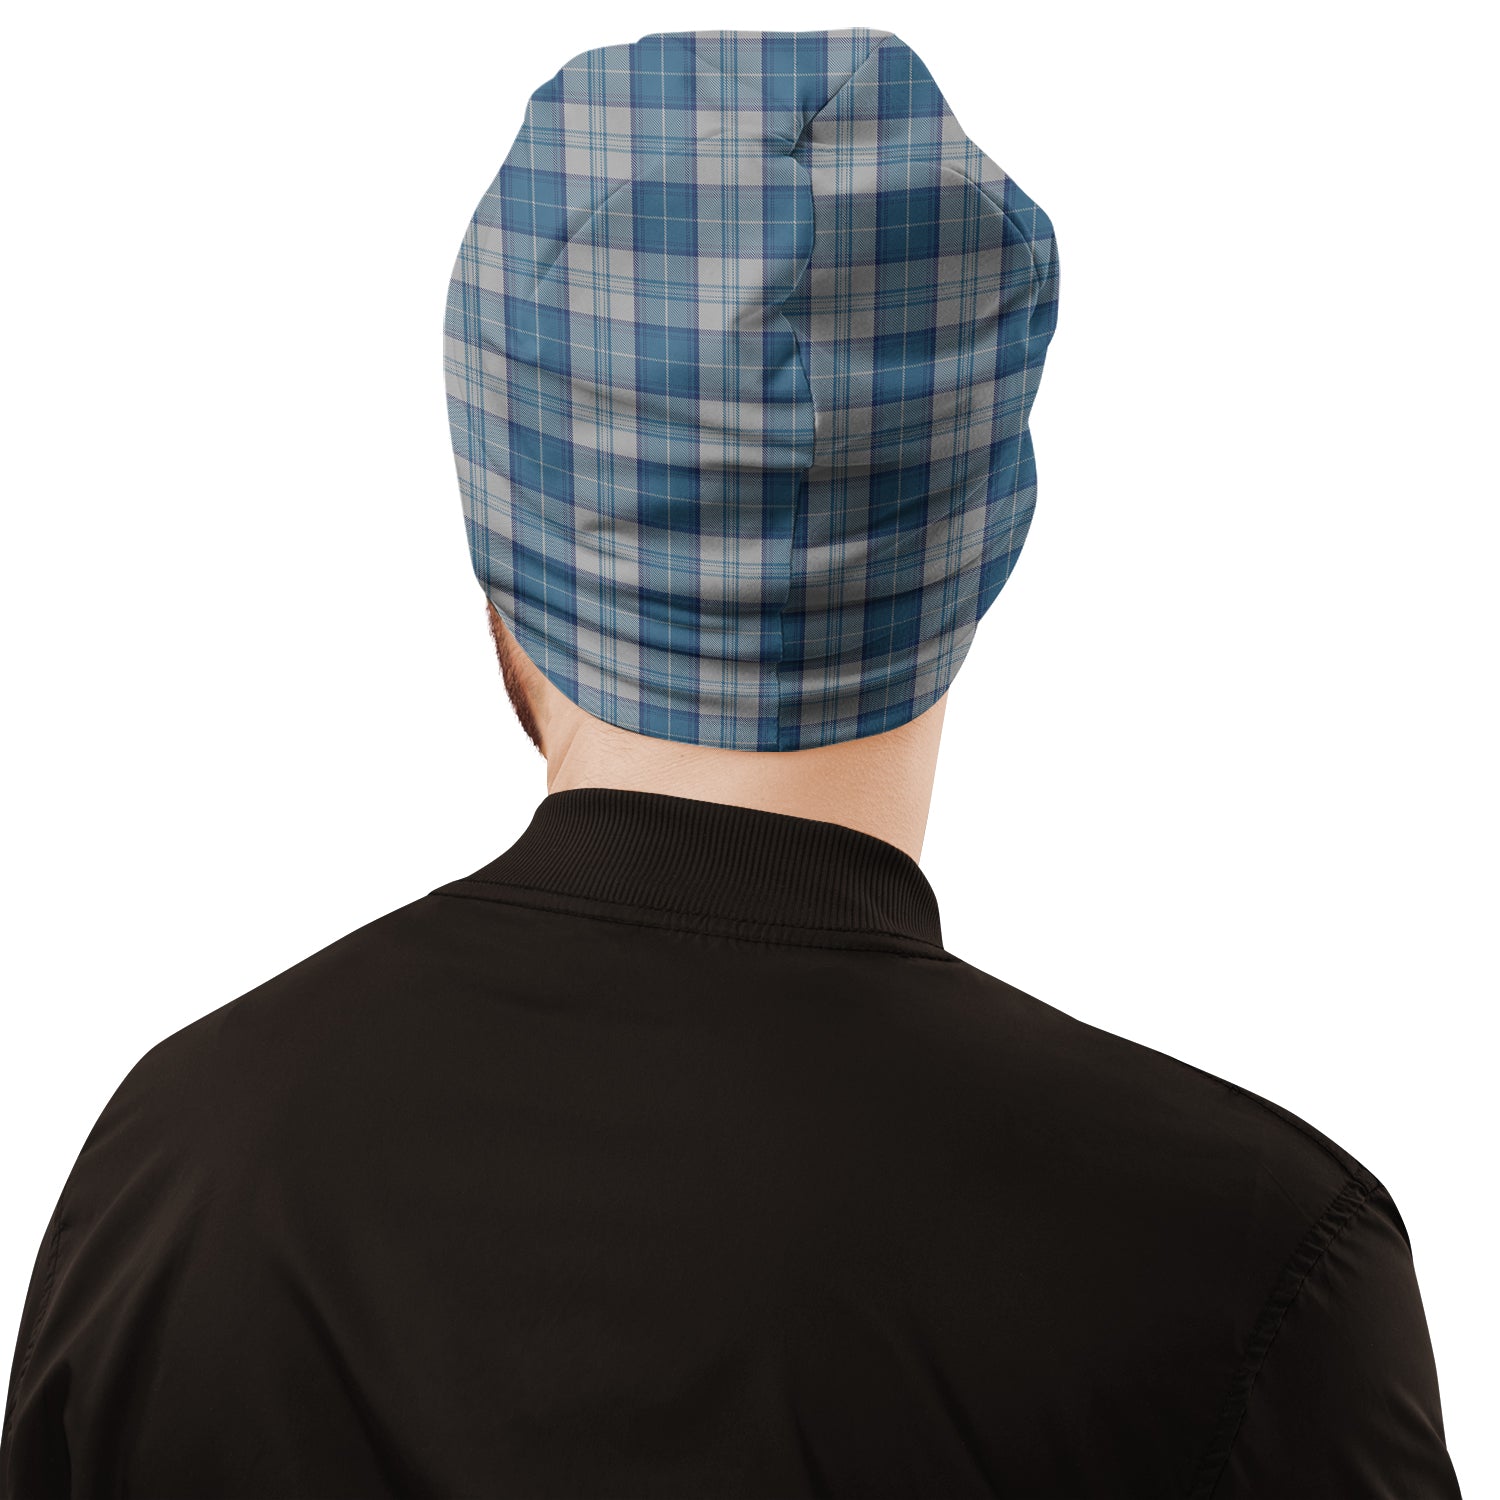 menzies-dress-blue-and-white-tartan-beanies-hat-with-family-crest